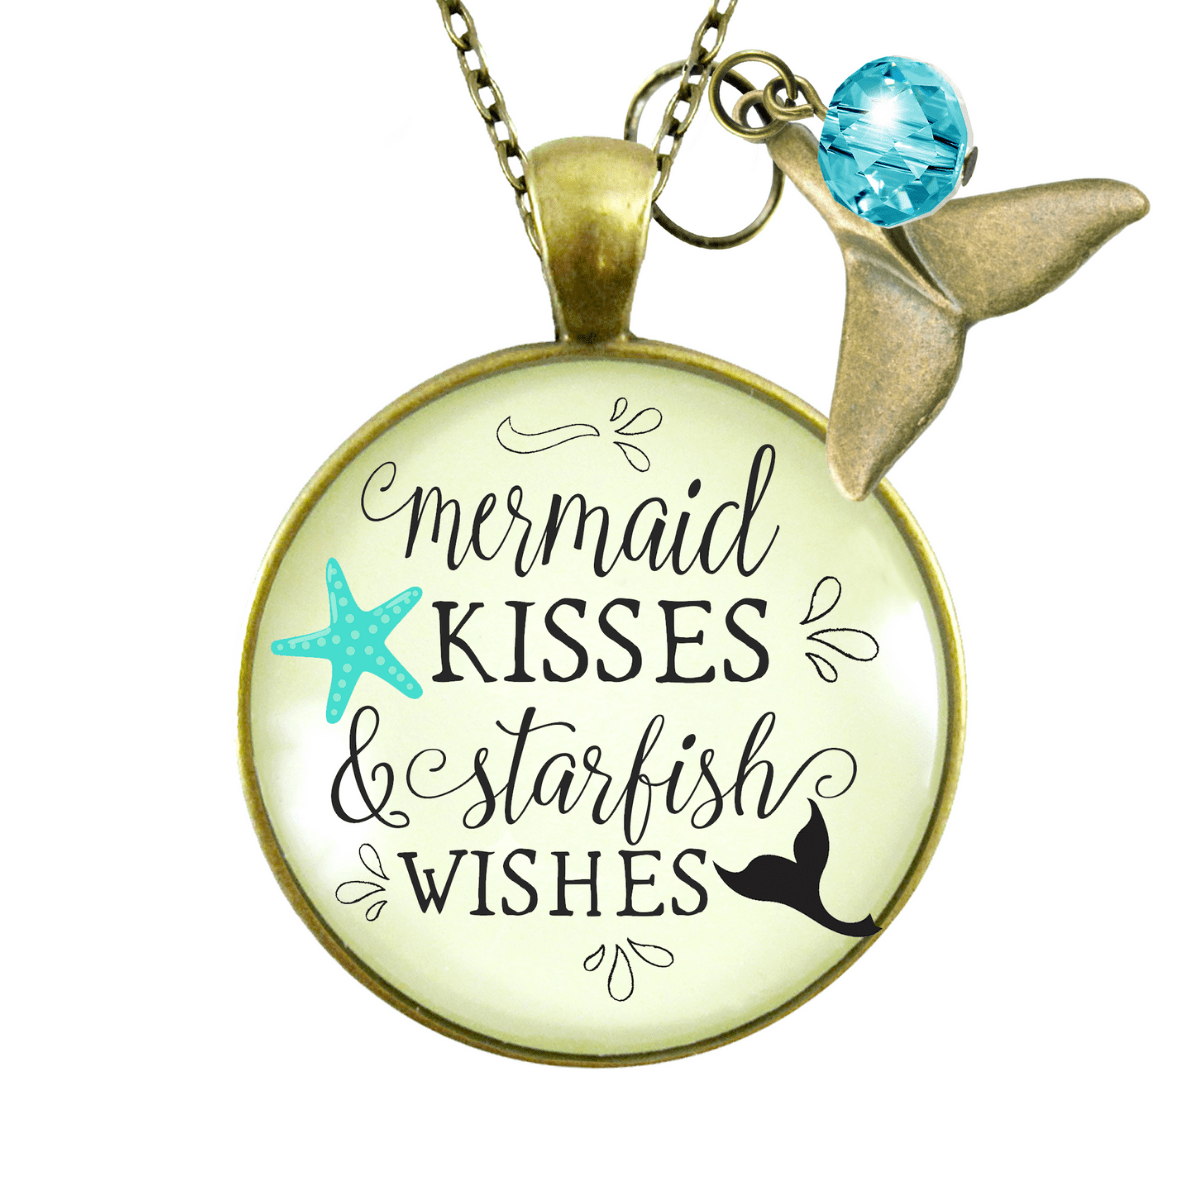 Gutsy Goodness Mermaid Tail Necklace Kisses Starfish Wishes Beach BFF Nautical Sea Gift Jewelry - Gutsy Goodness Handmade Jewelry;Mermaid Tail Necklace Kisses Starfish Wishes Beach Bff Nautical Sea Gift Jewelry - Gutsy Goodness Handmade Jewelry Gifts